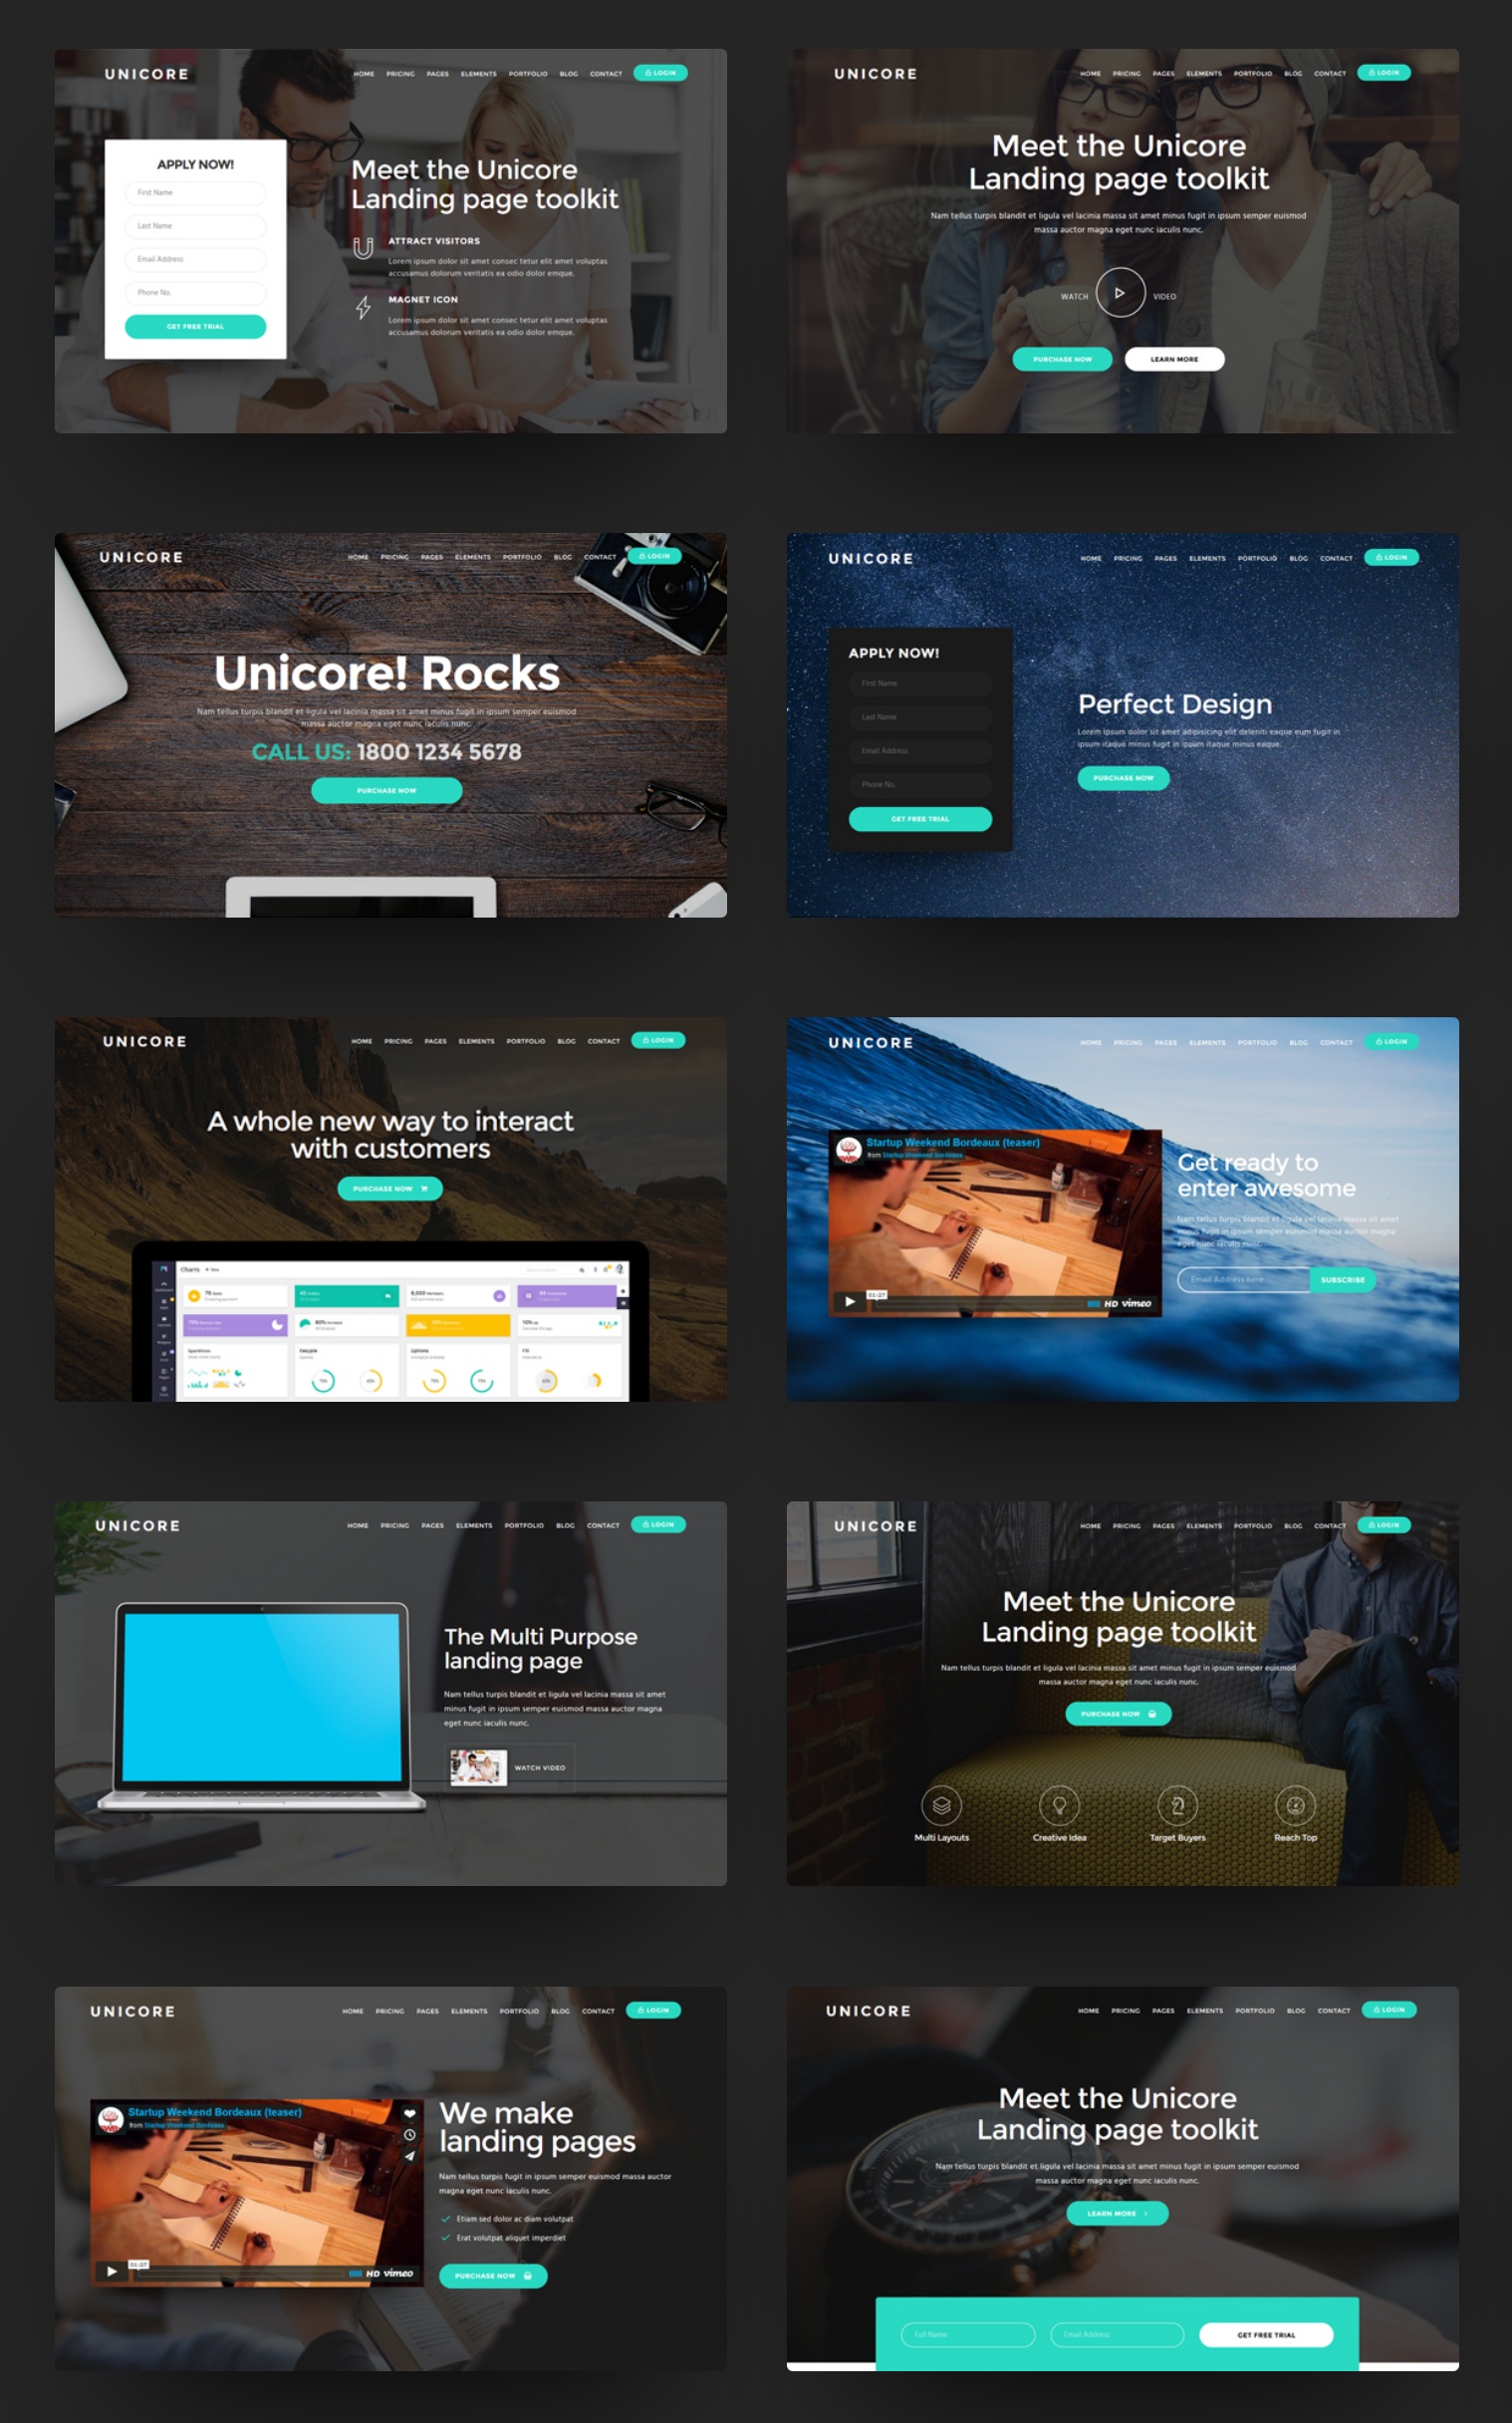 unicore preview1 - Unicore - Mobirise Builder with 20 HTML Bootstrap Landing Page Templates